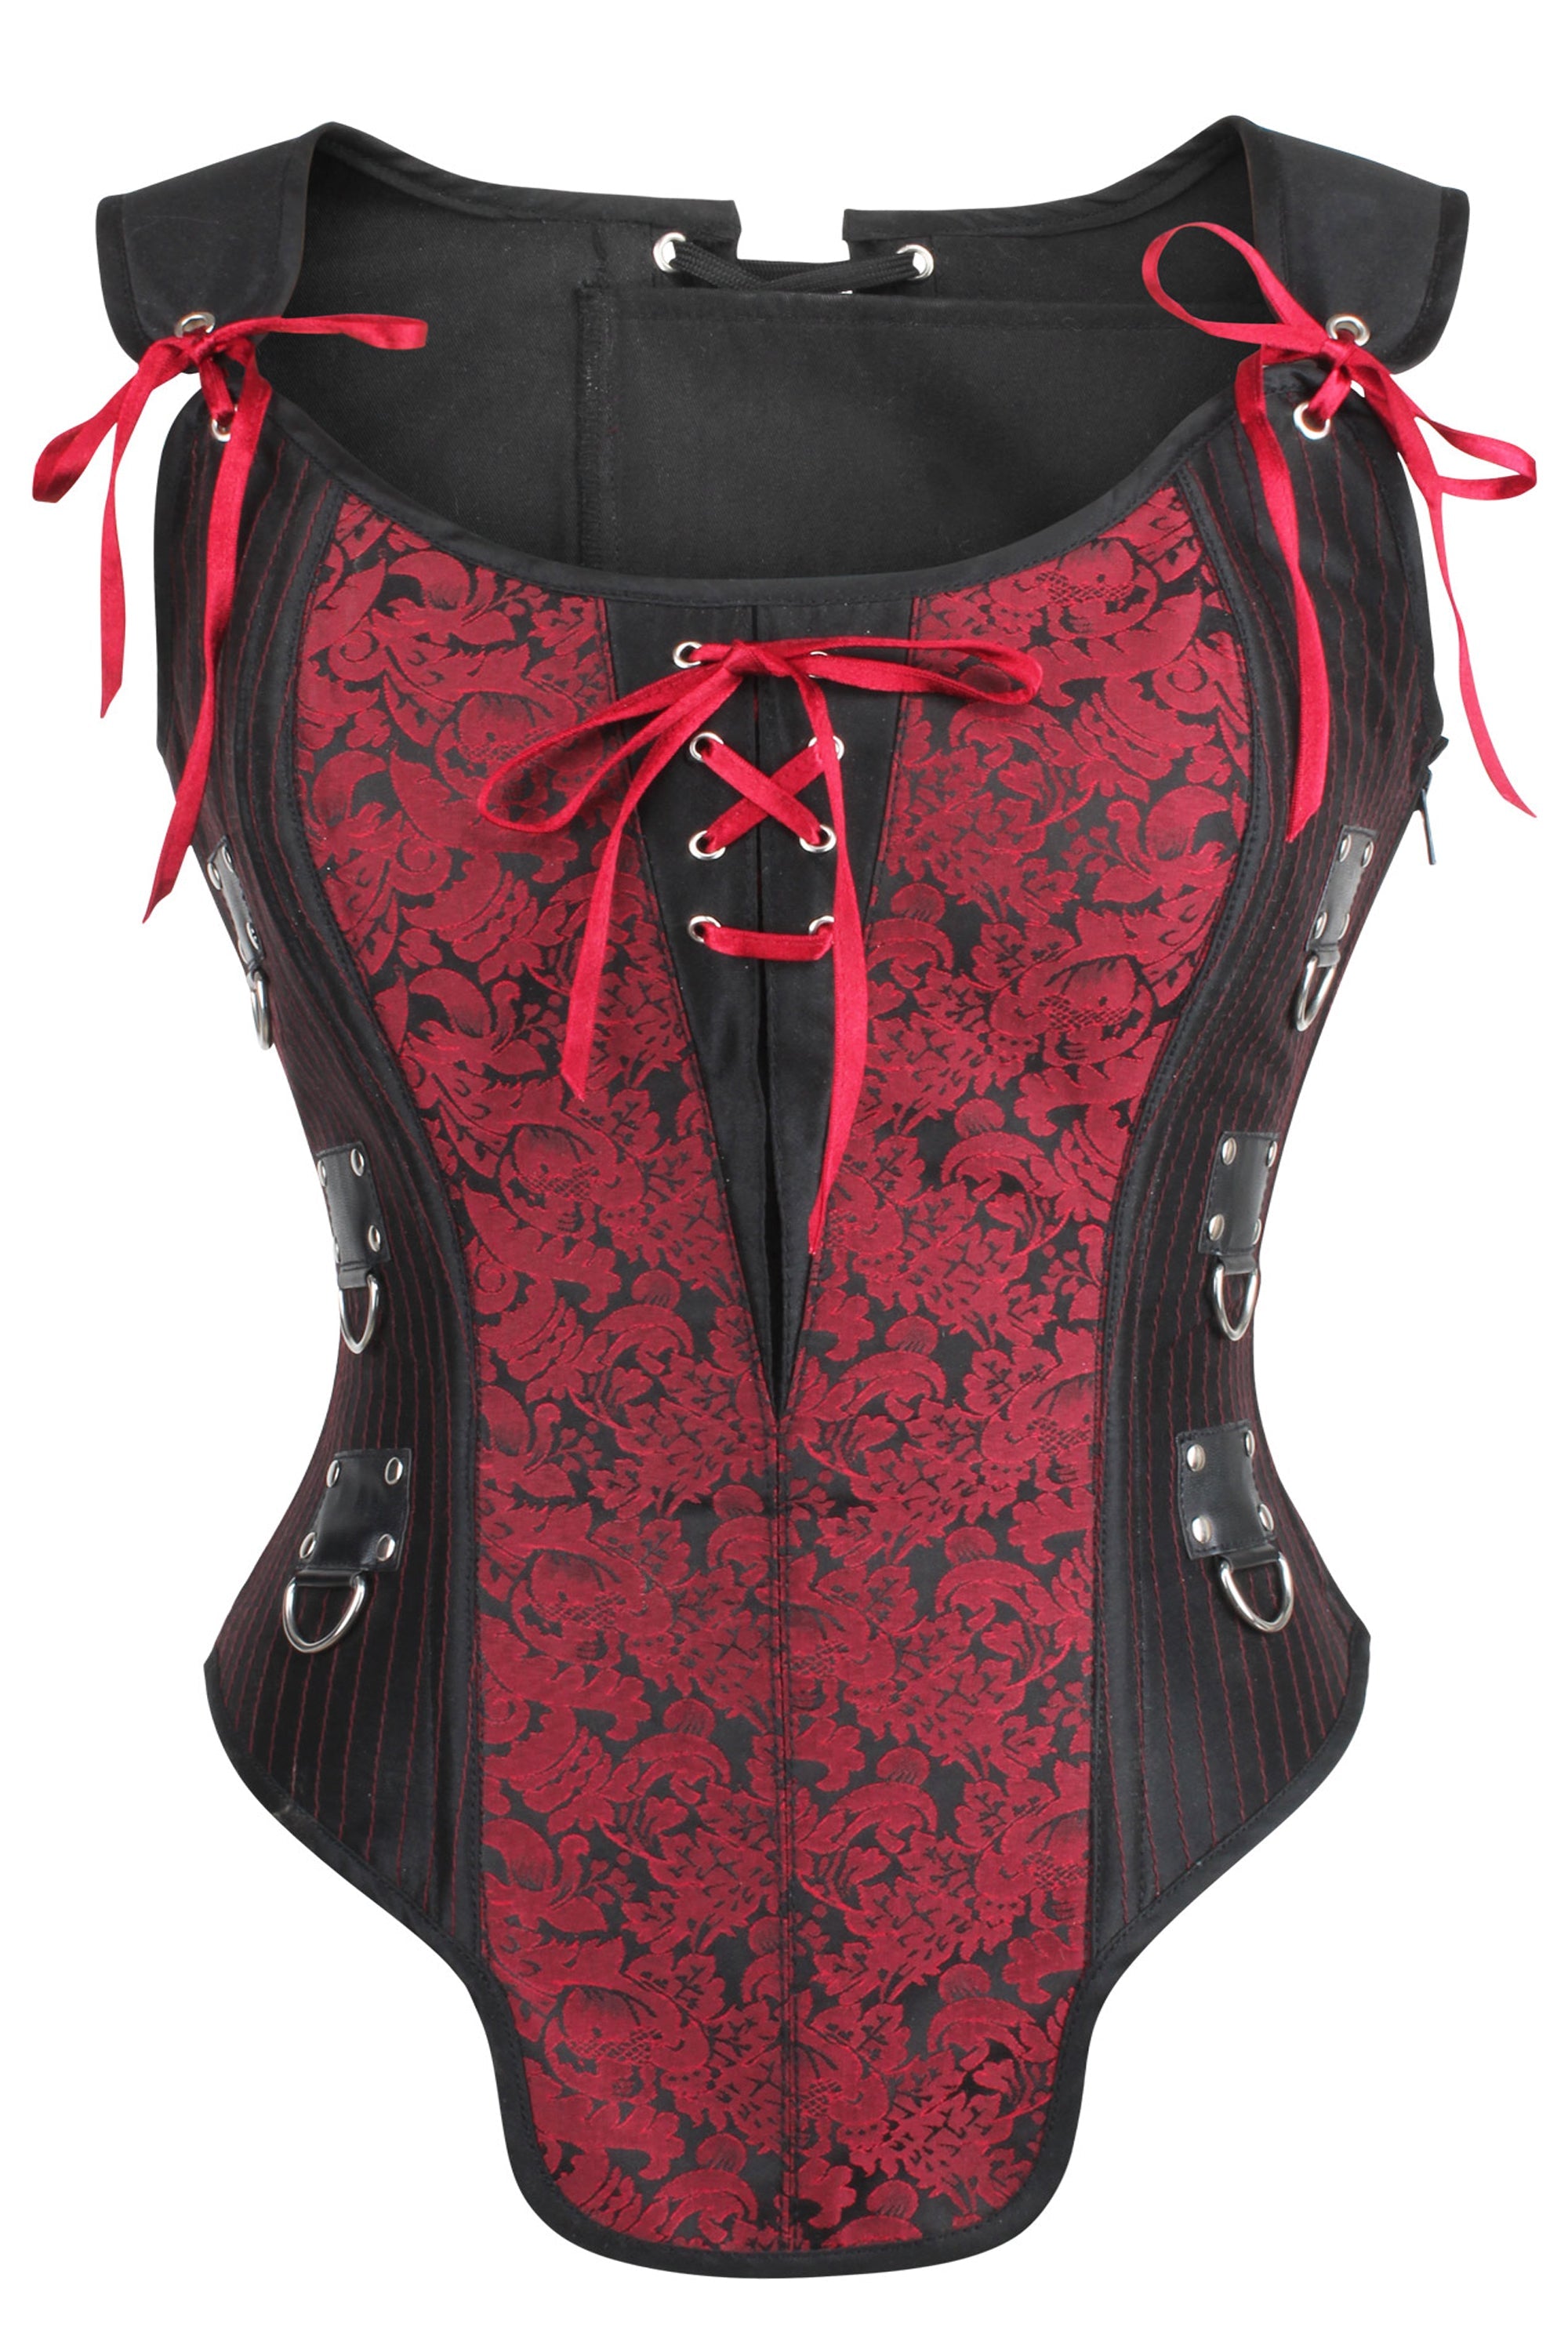 Red and Black Steampunk Overbust Corset with Shoulder Straps